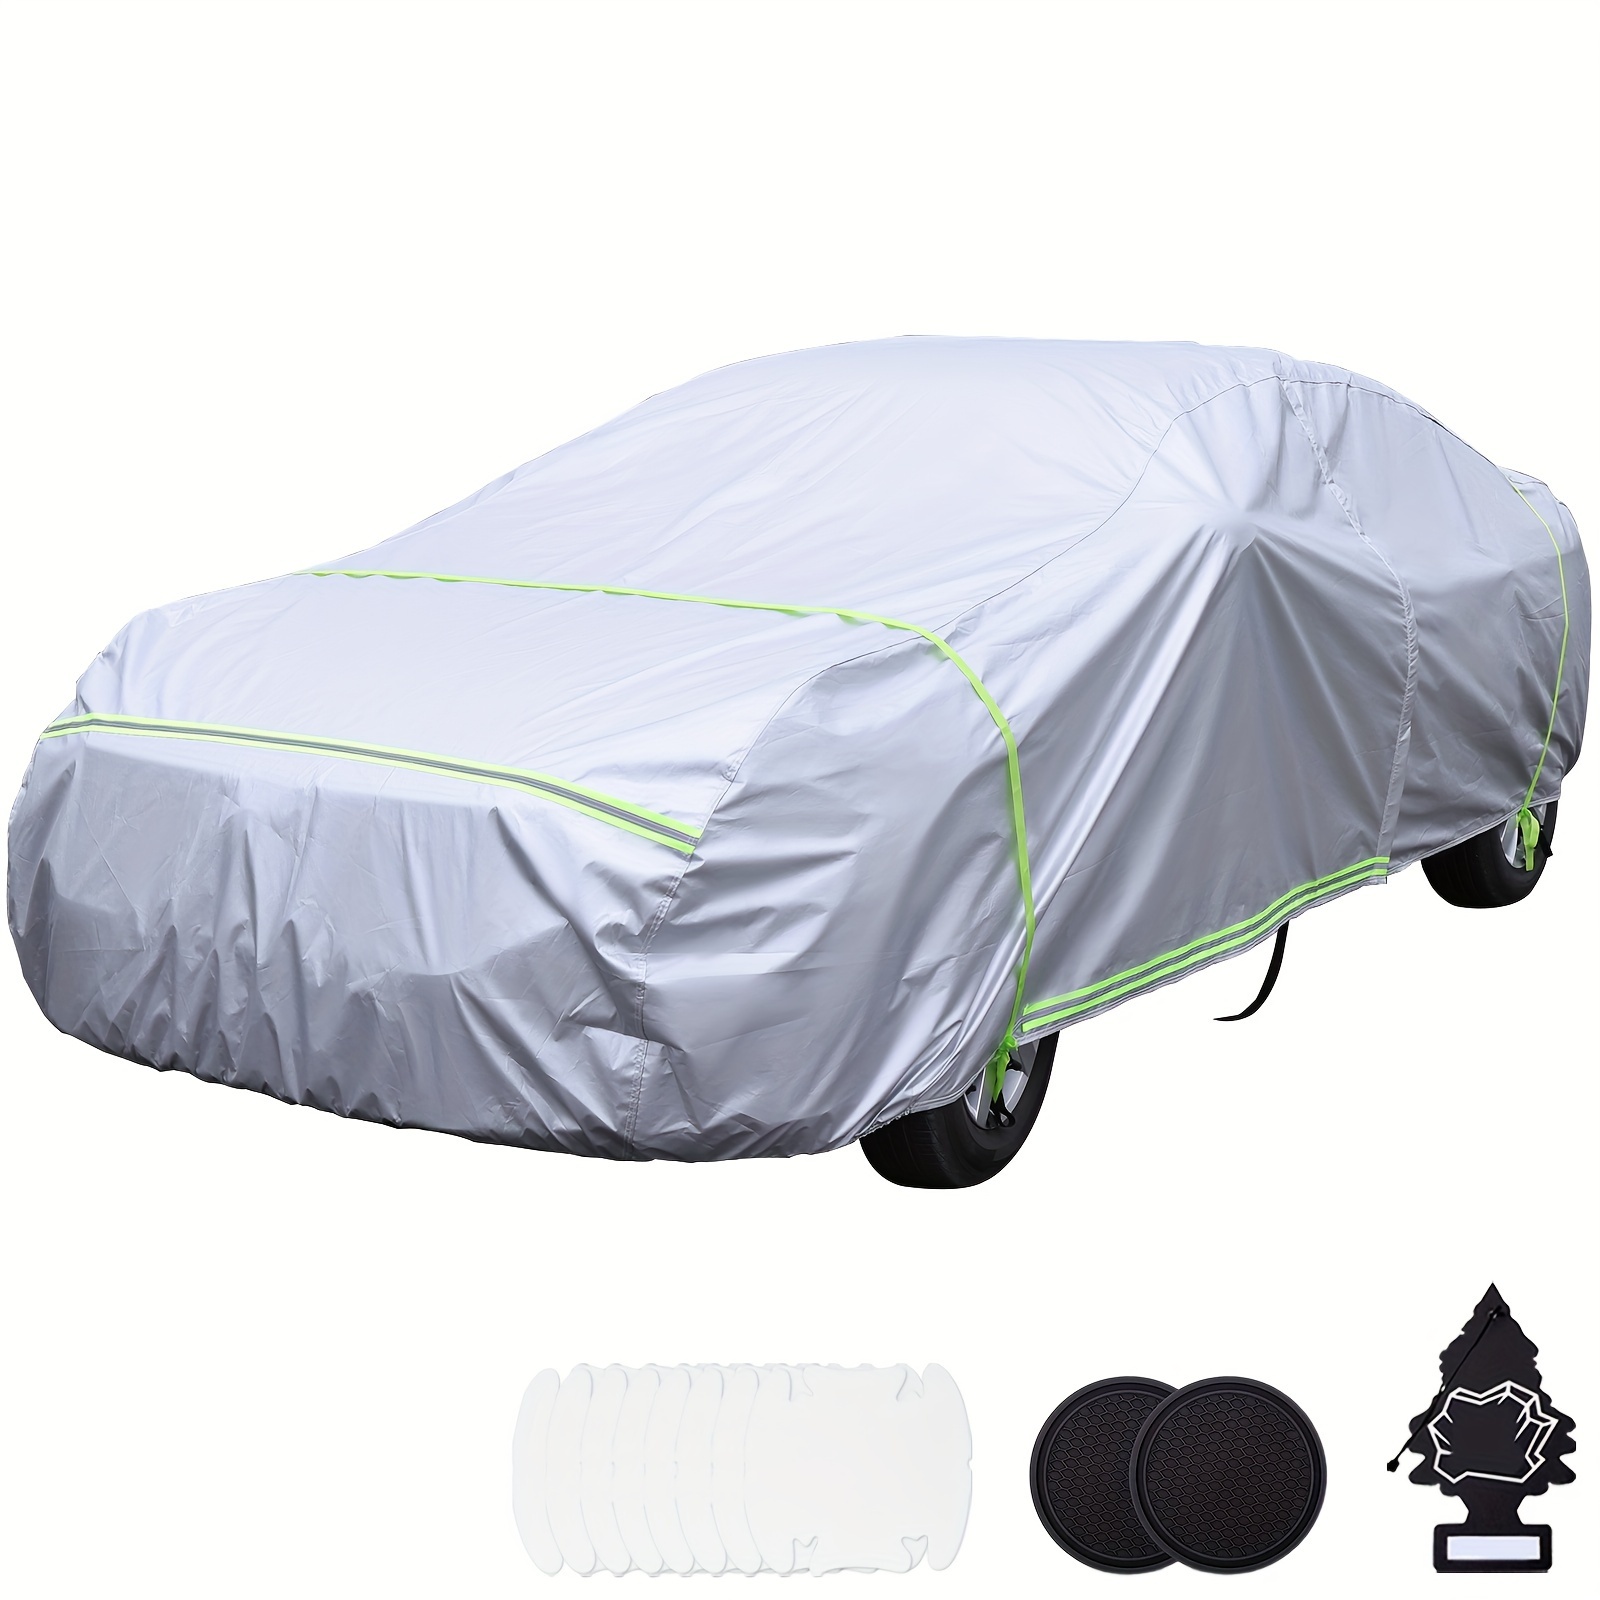 

Car Cover Waterproof All Weather 6 Layers Snowproof Windproof Full Exterior Covers Uv Protection 210d Oxford Universal Fit Outdoor Car Cover For Automobiles Zipper Cotton Inside